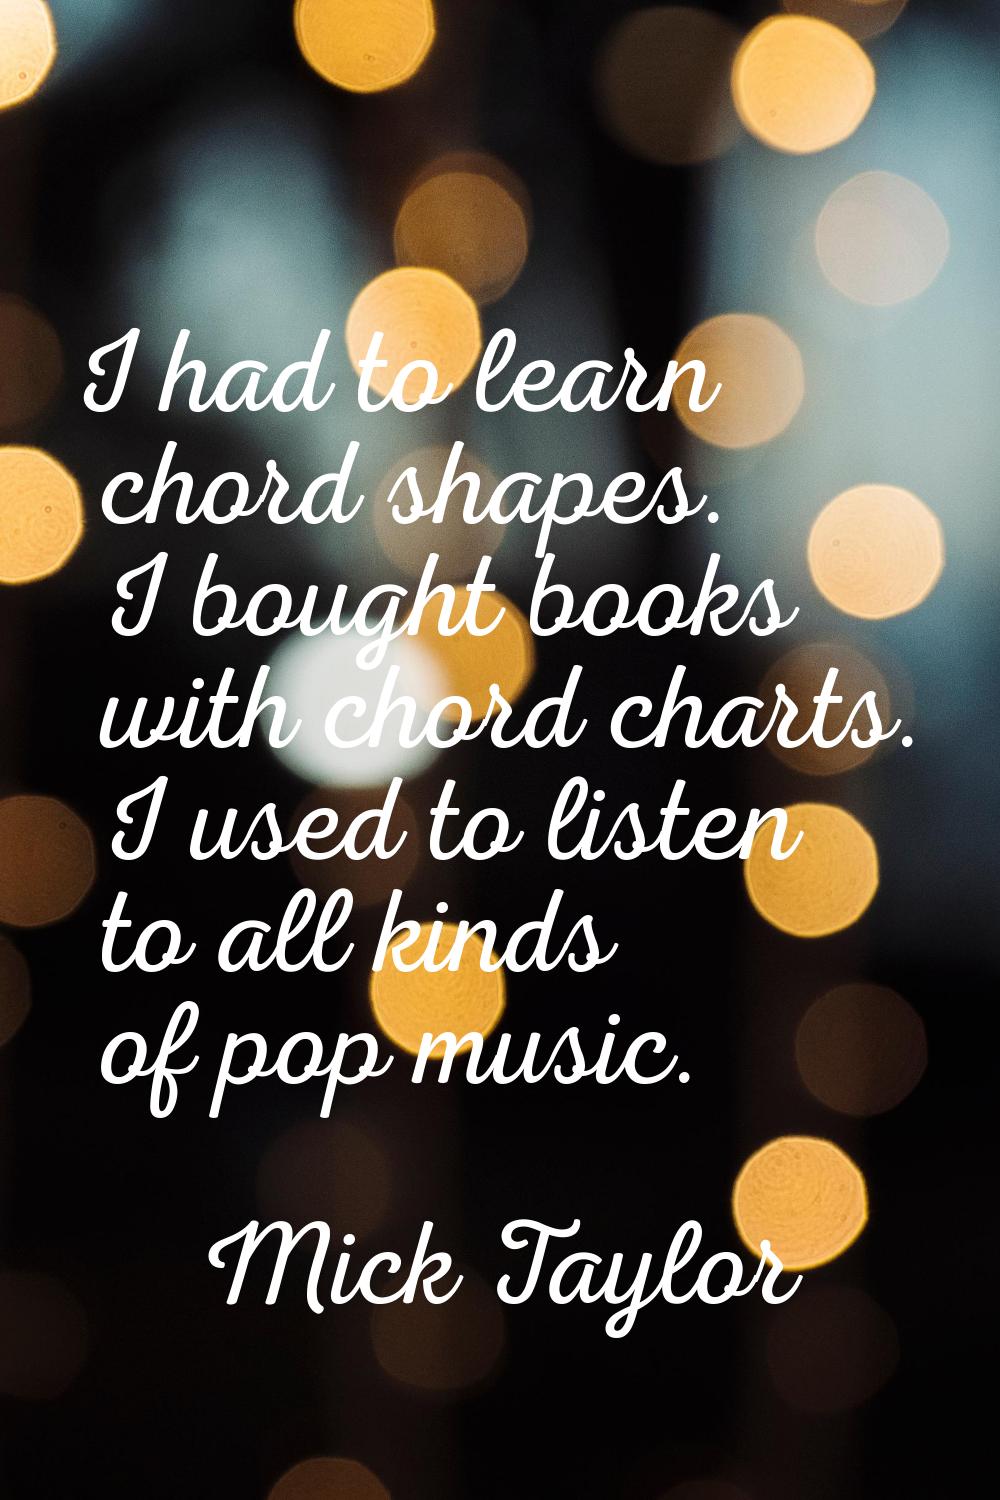 I had to learn chord shapes. I bought books with chord charts. I used to listen to all kinds of pop